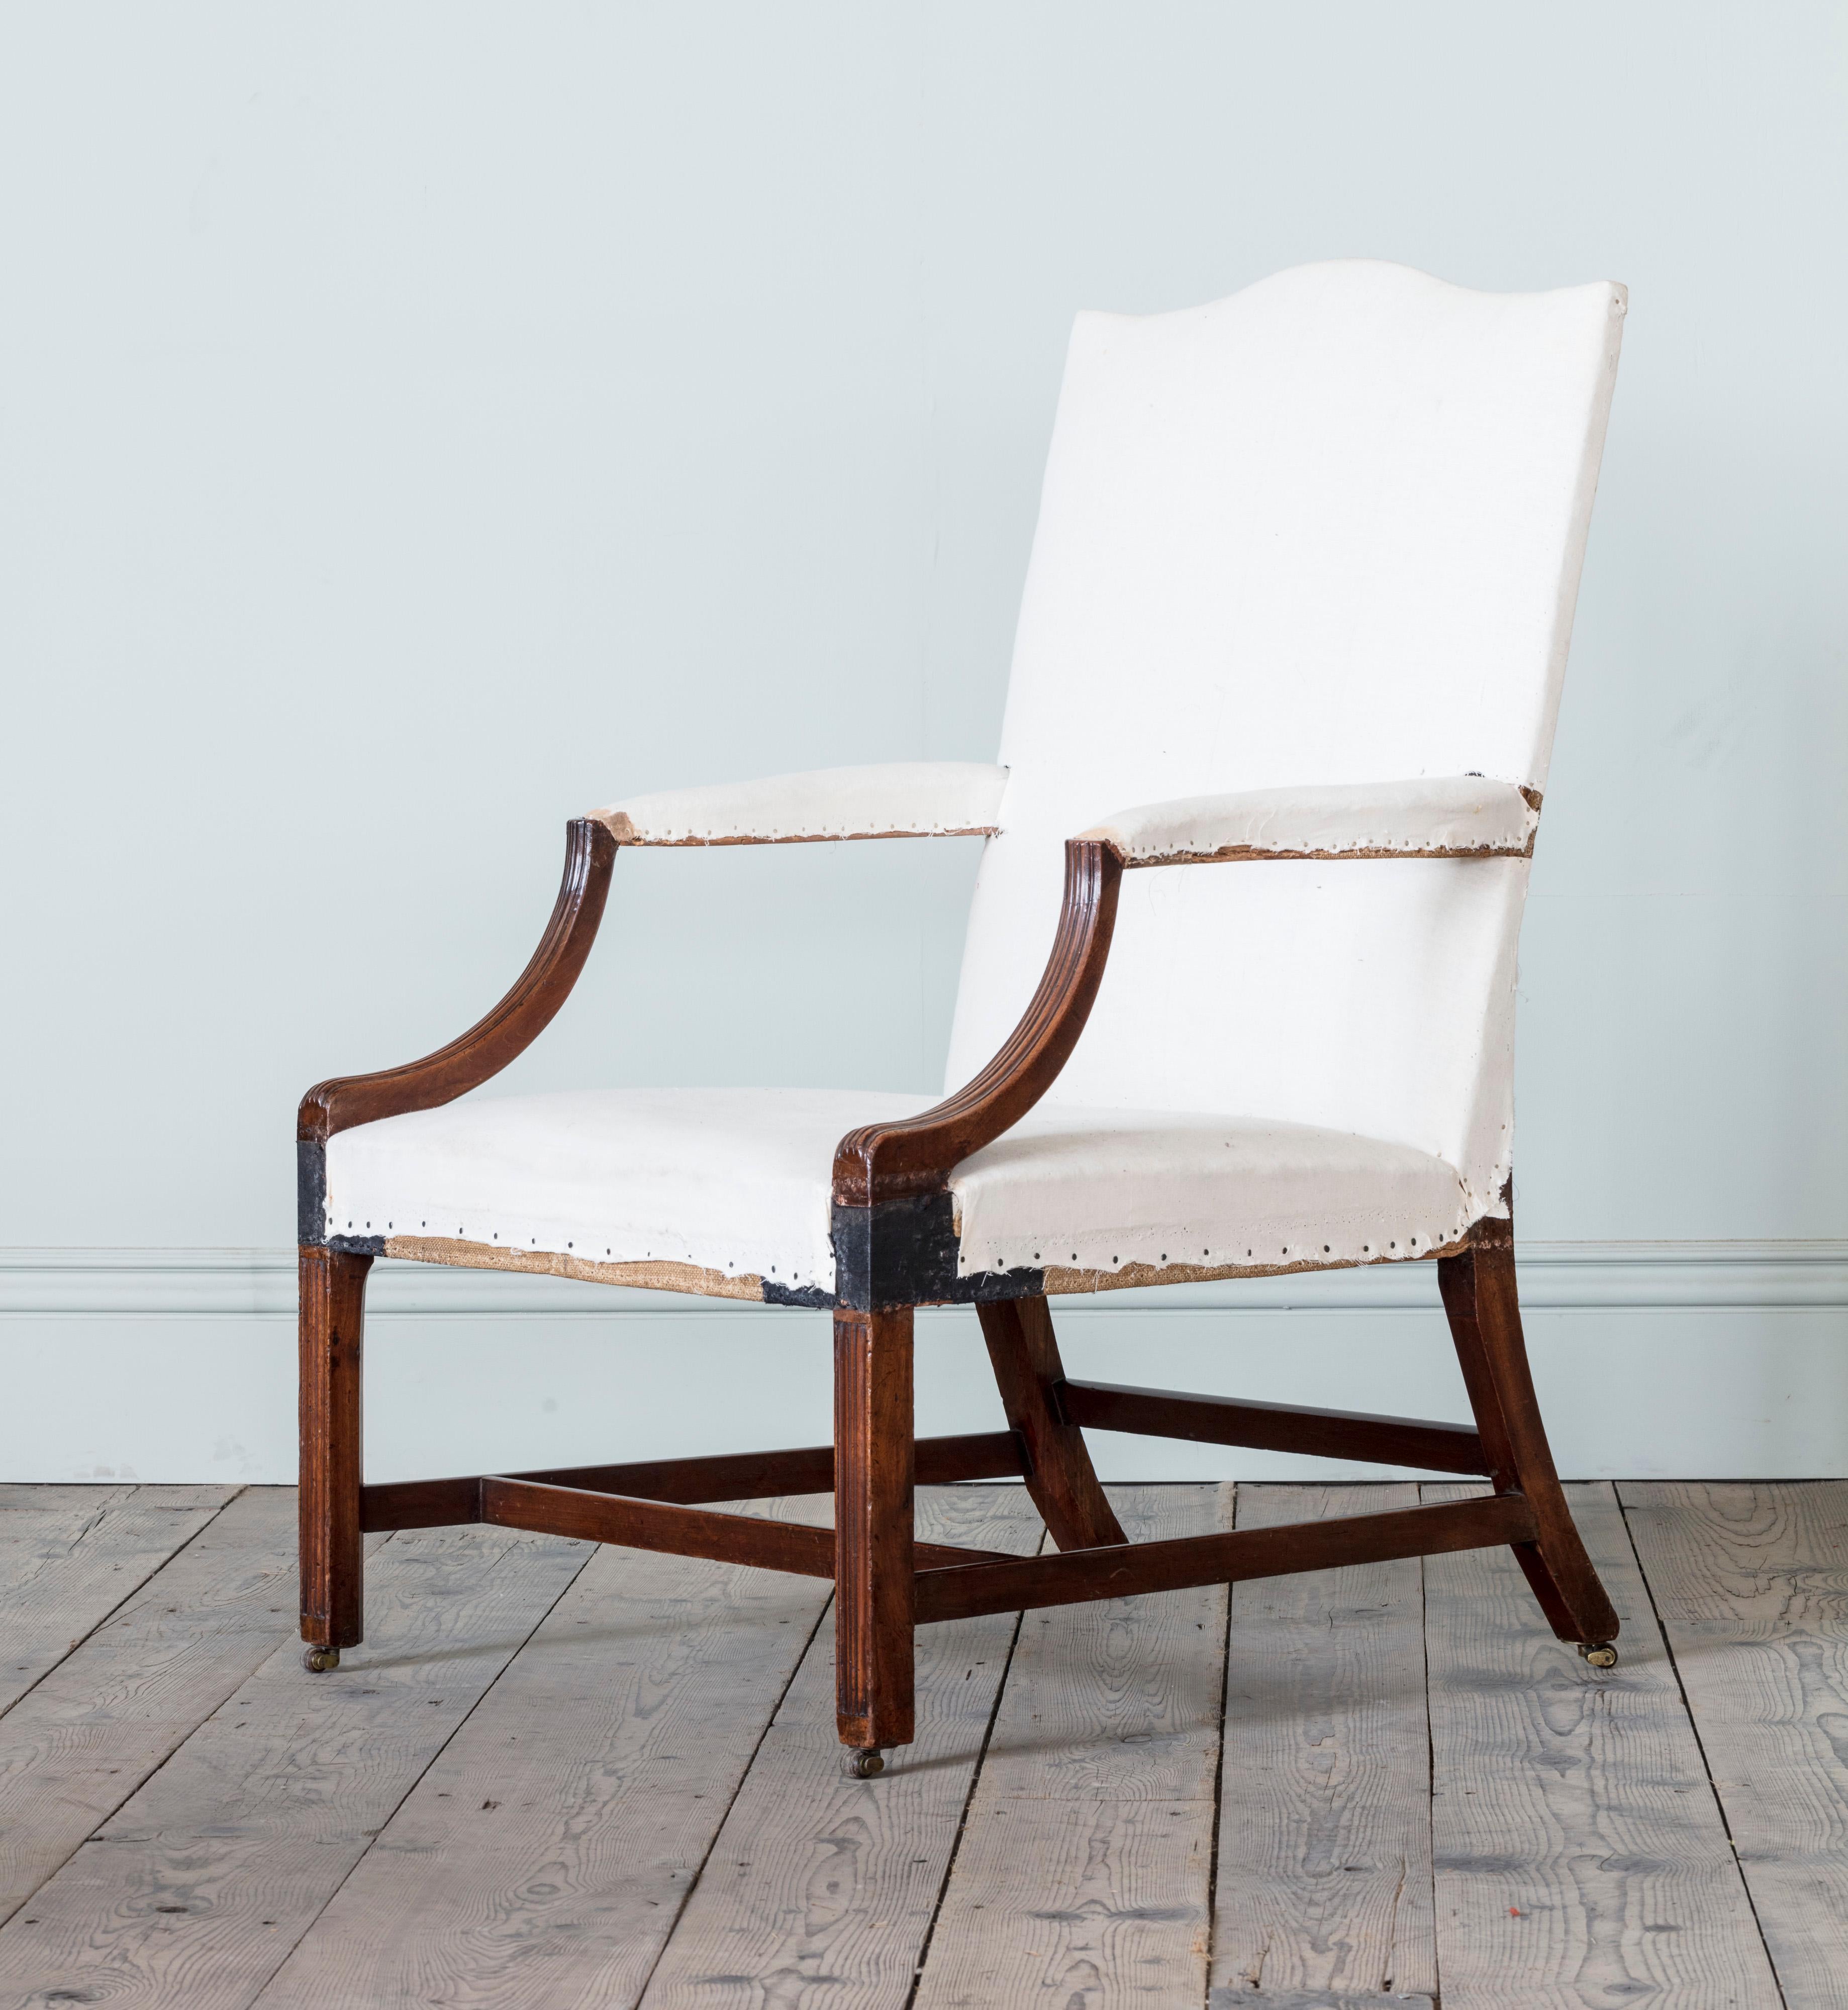 With beautifully drawn line and generous scale, with superb quality timber, and crisply incised channel mouldings to the front legs and raised mouldings to the swept show wood arm supports.
The chairs are offered in lovely condition with original